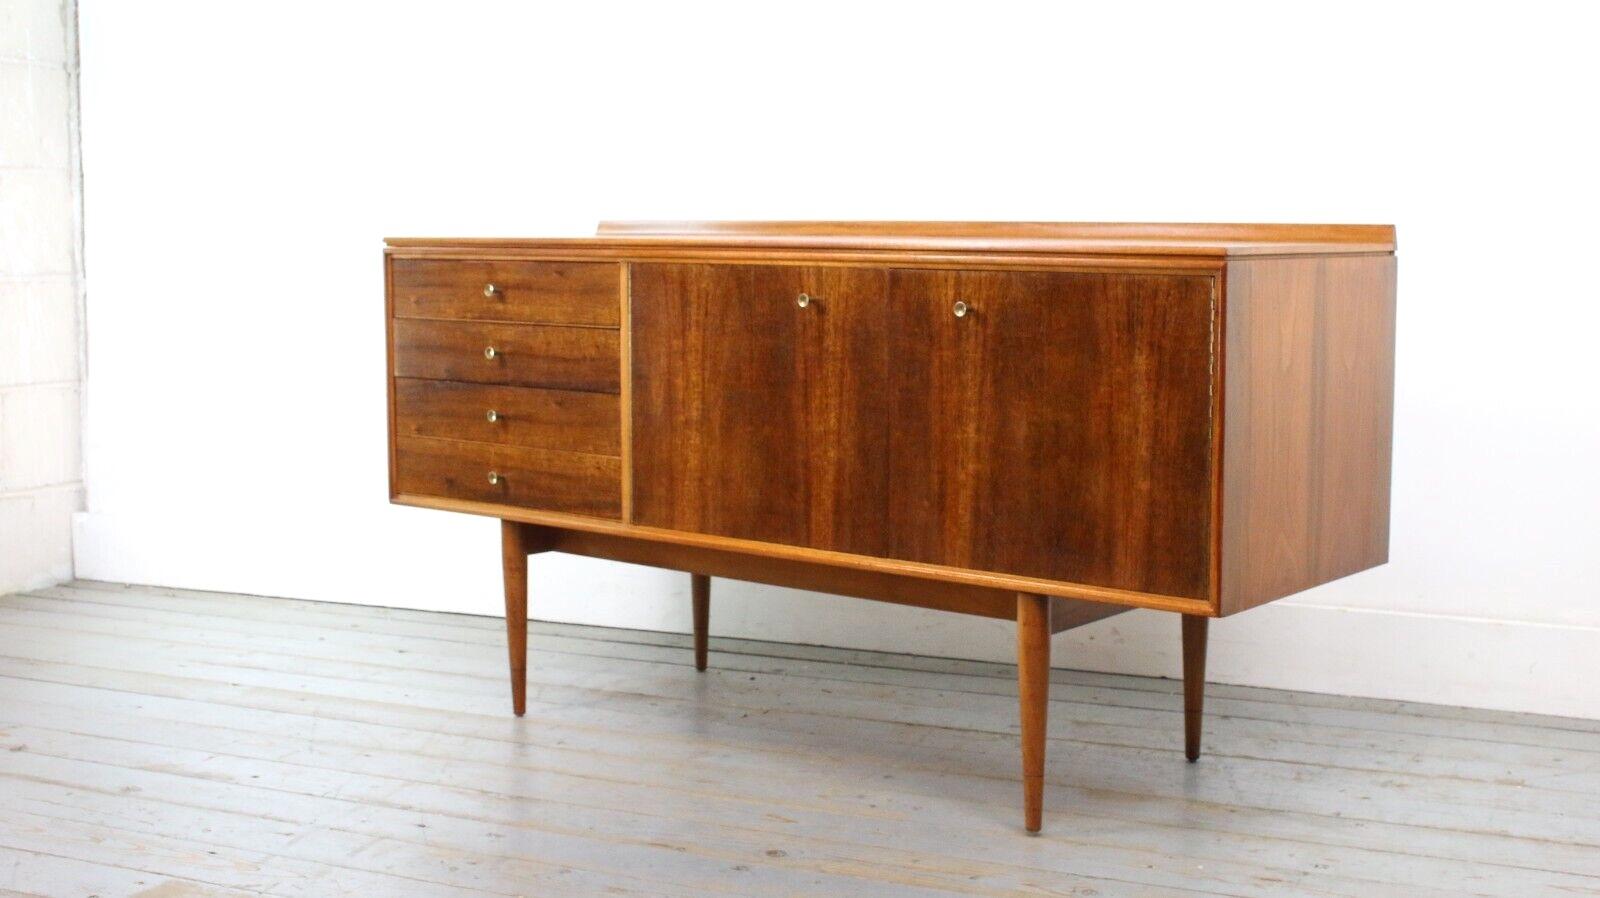 Archie Shine Sideboard by Robert Heritage with a rich grained Indian Laurel front.

This rarely available compact design with brass trumpet-shaped handles is a sought-after Archie Shine' Hanover' sideboard. Featuring four drawers and a shelved